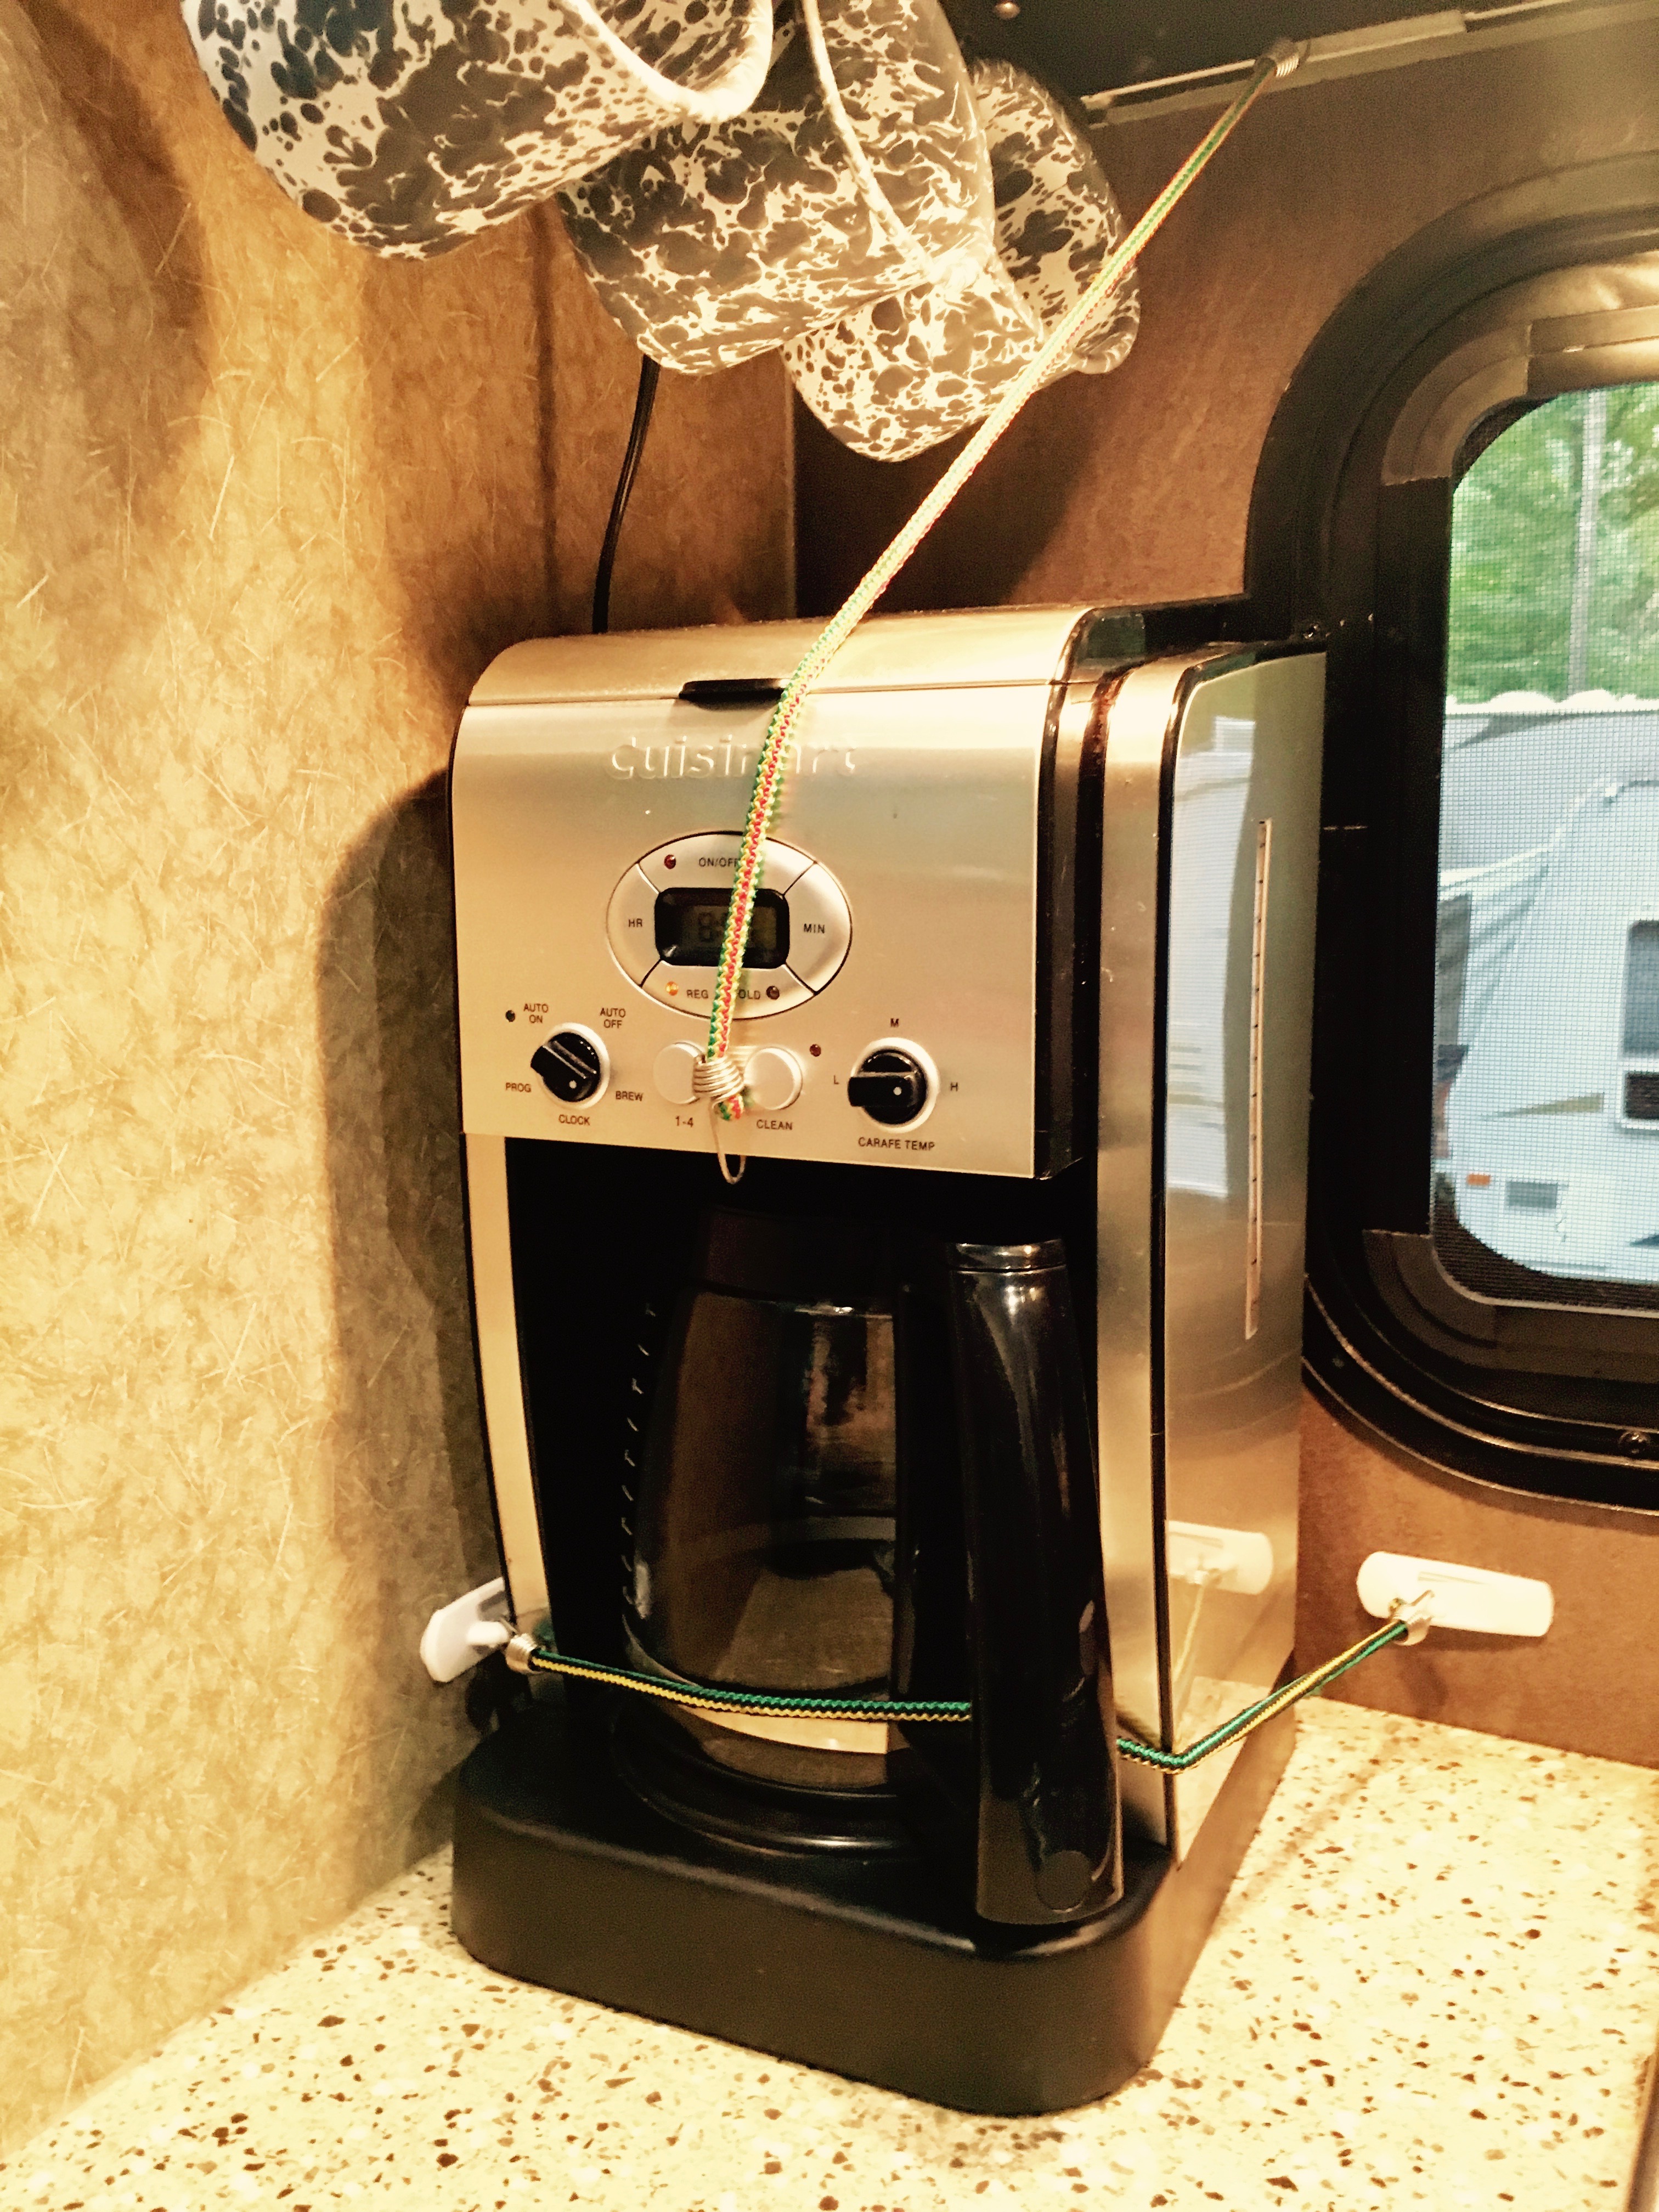 How to Secure Coffee Maker in RV? Guide for Protection